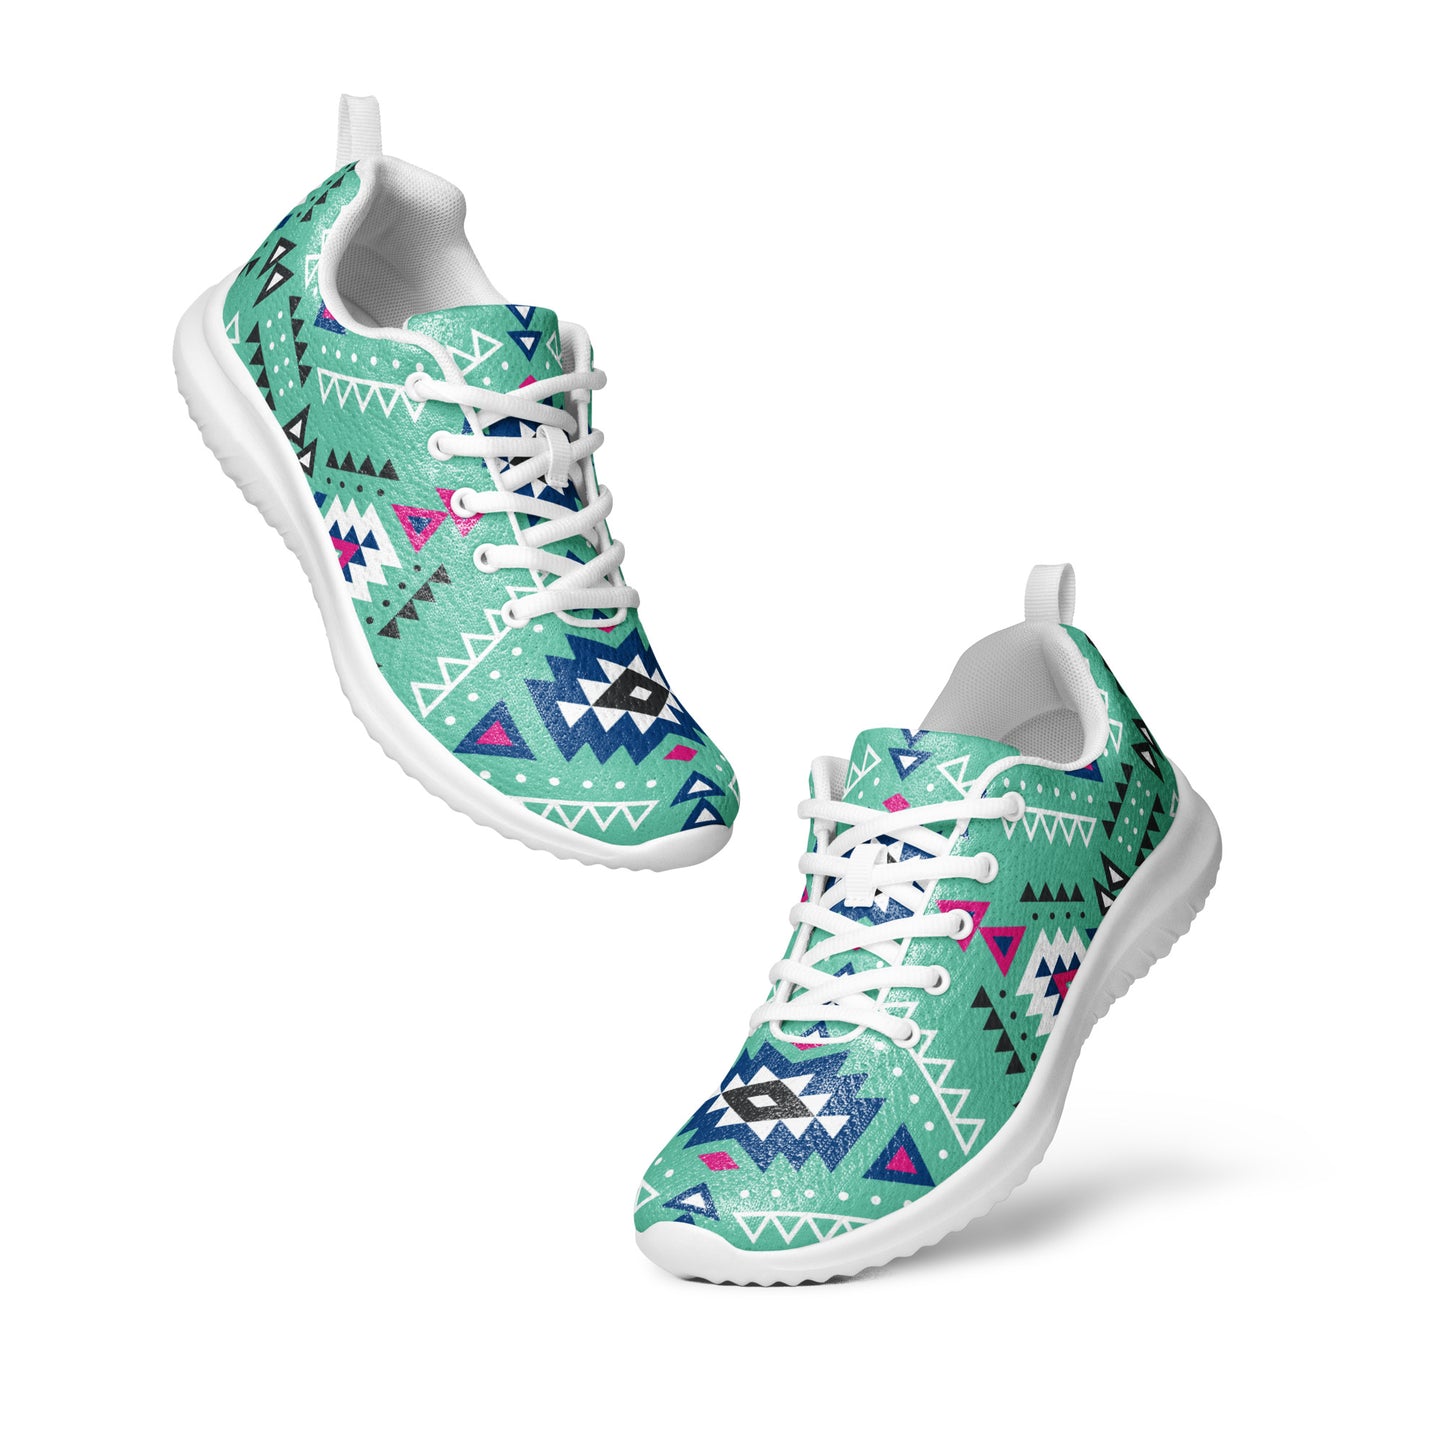 Aztec Turquoise Western Style Women’s athletic shoes